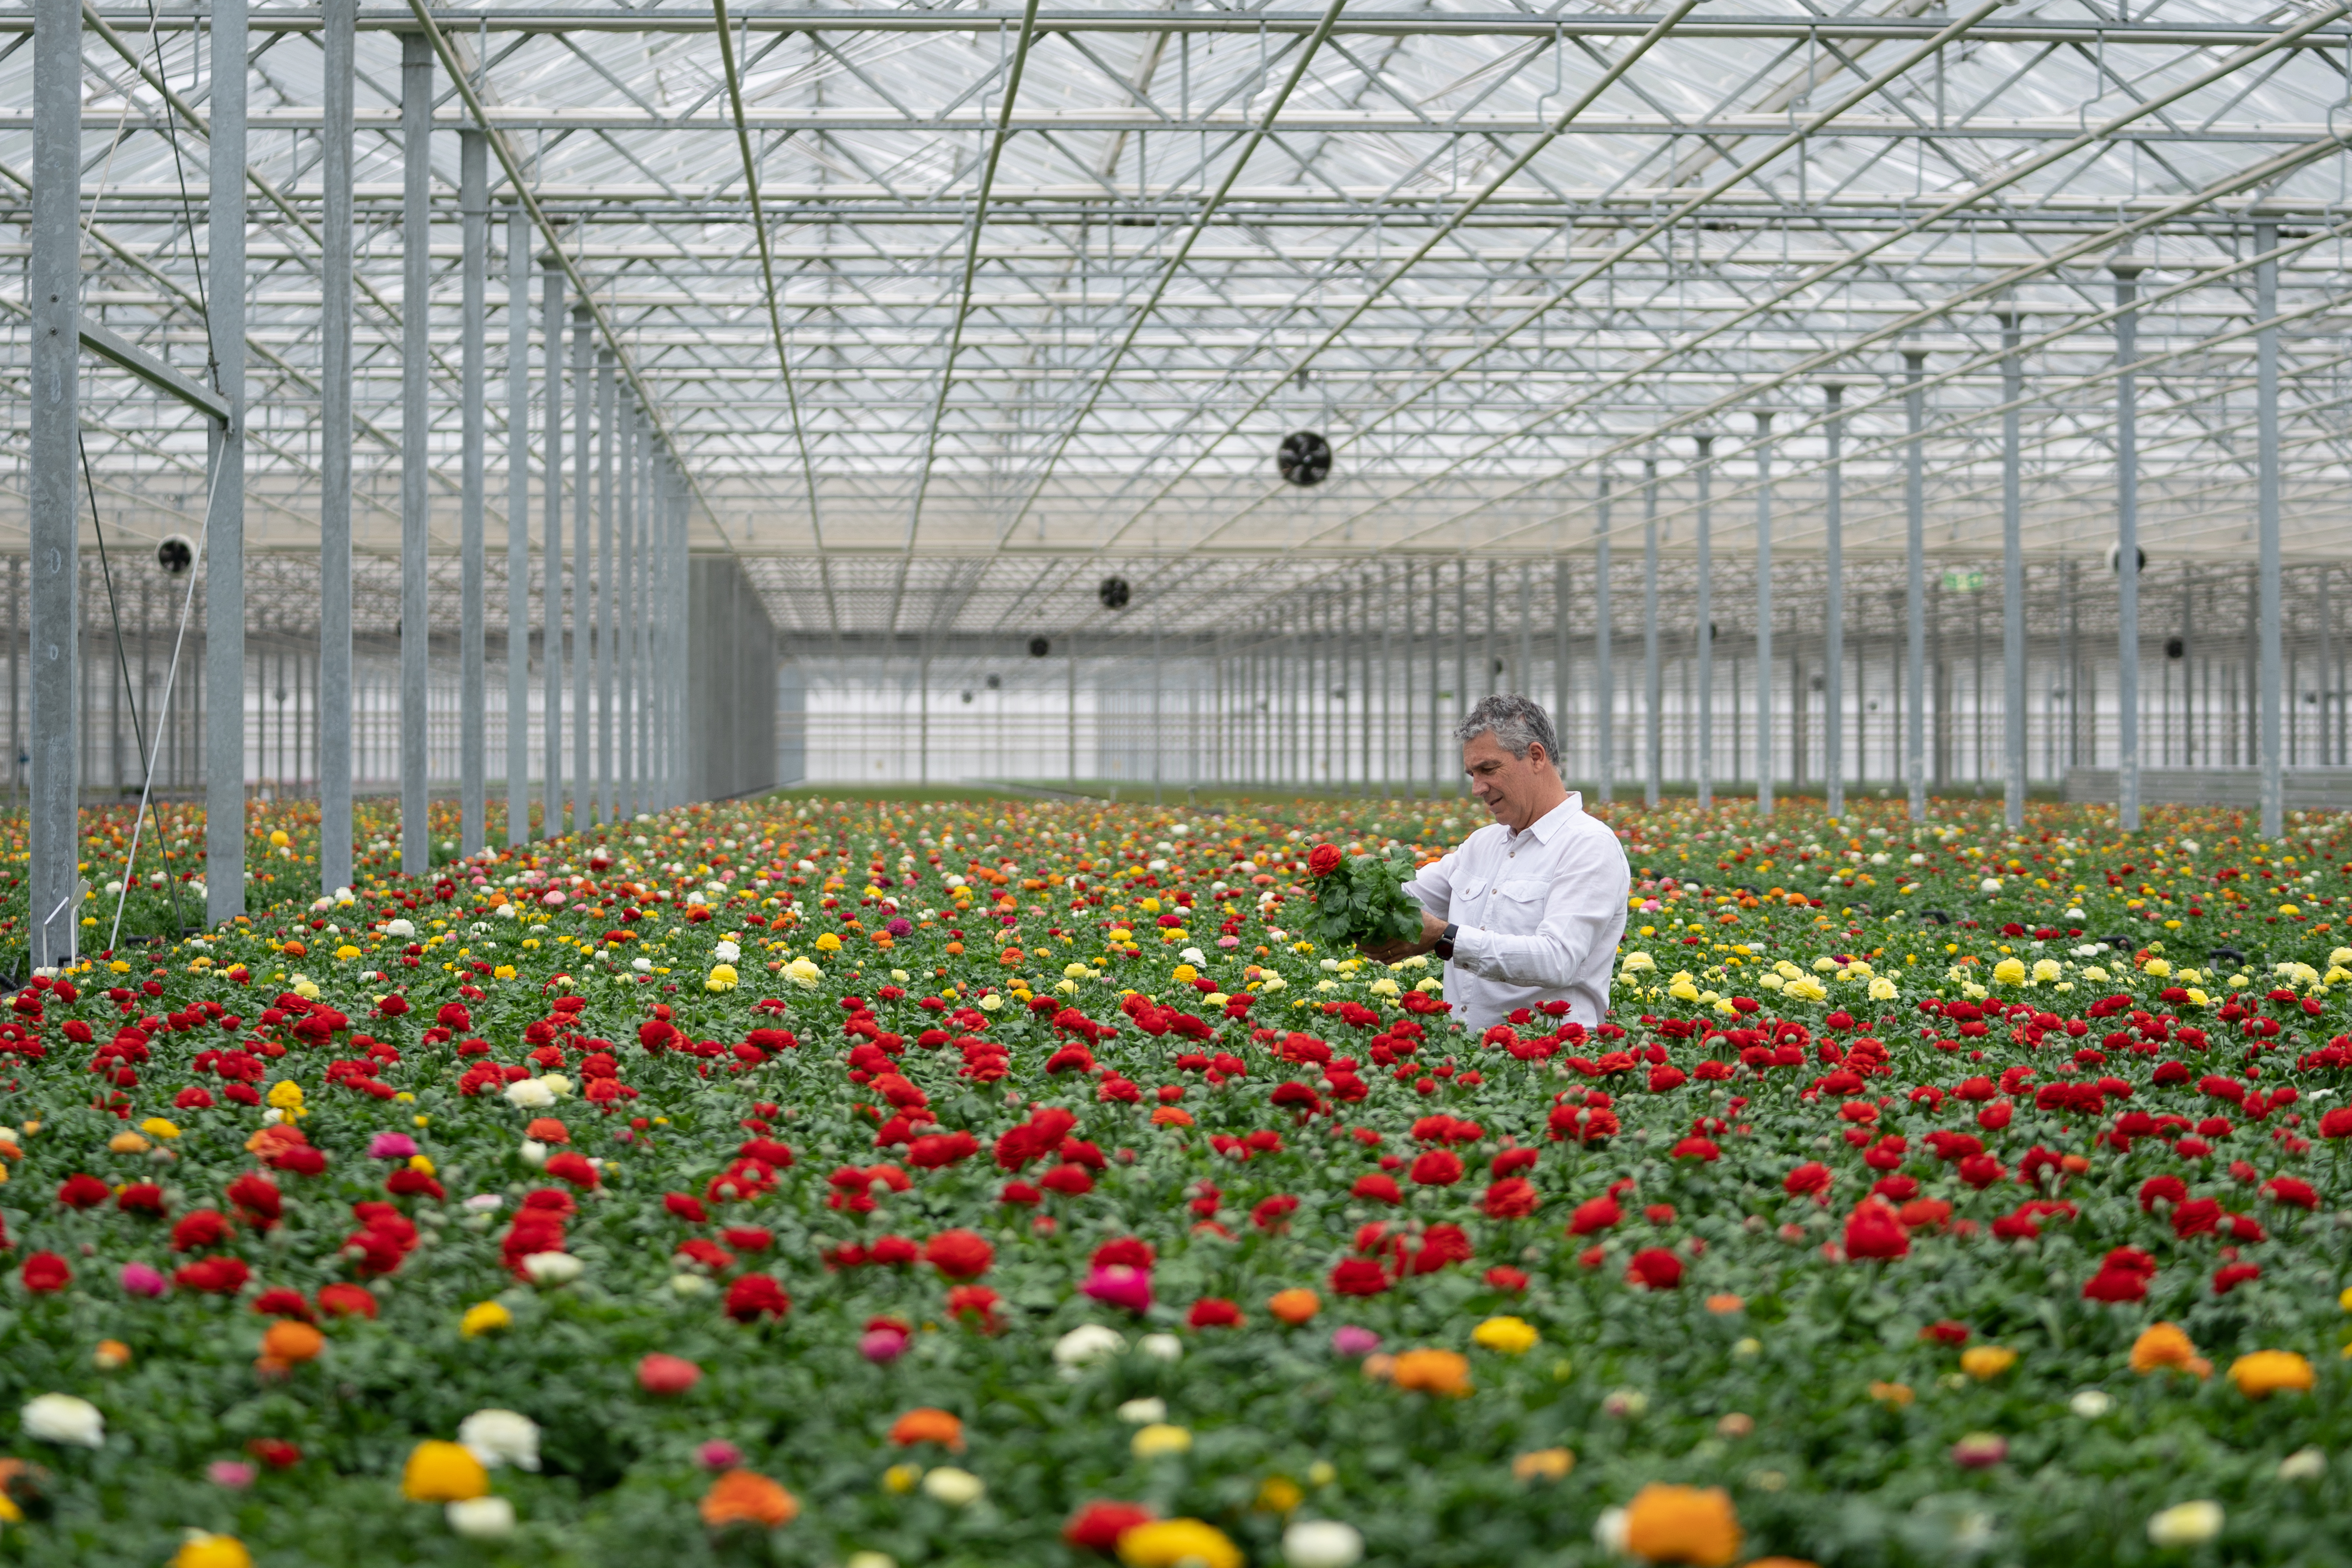 Instead of peat, all Tesco’s British bedding plants, which are grown by the Bridge Farm Group, based in Spalding, Lincolnshire, will use alternatives such as wood fibre and organic by-products. (Joe Giddens/ PA)